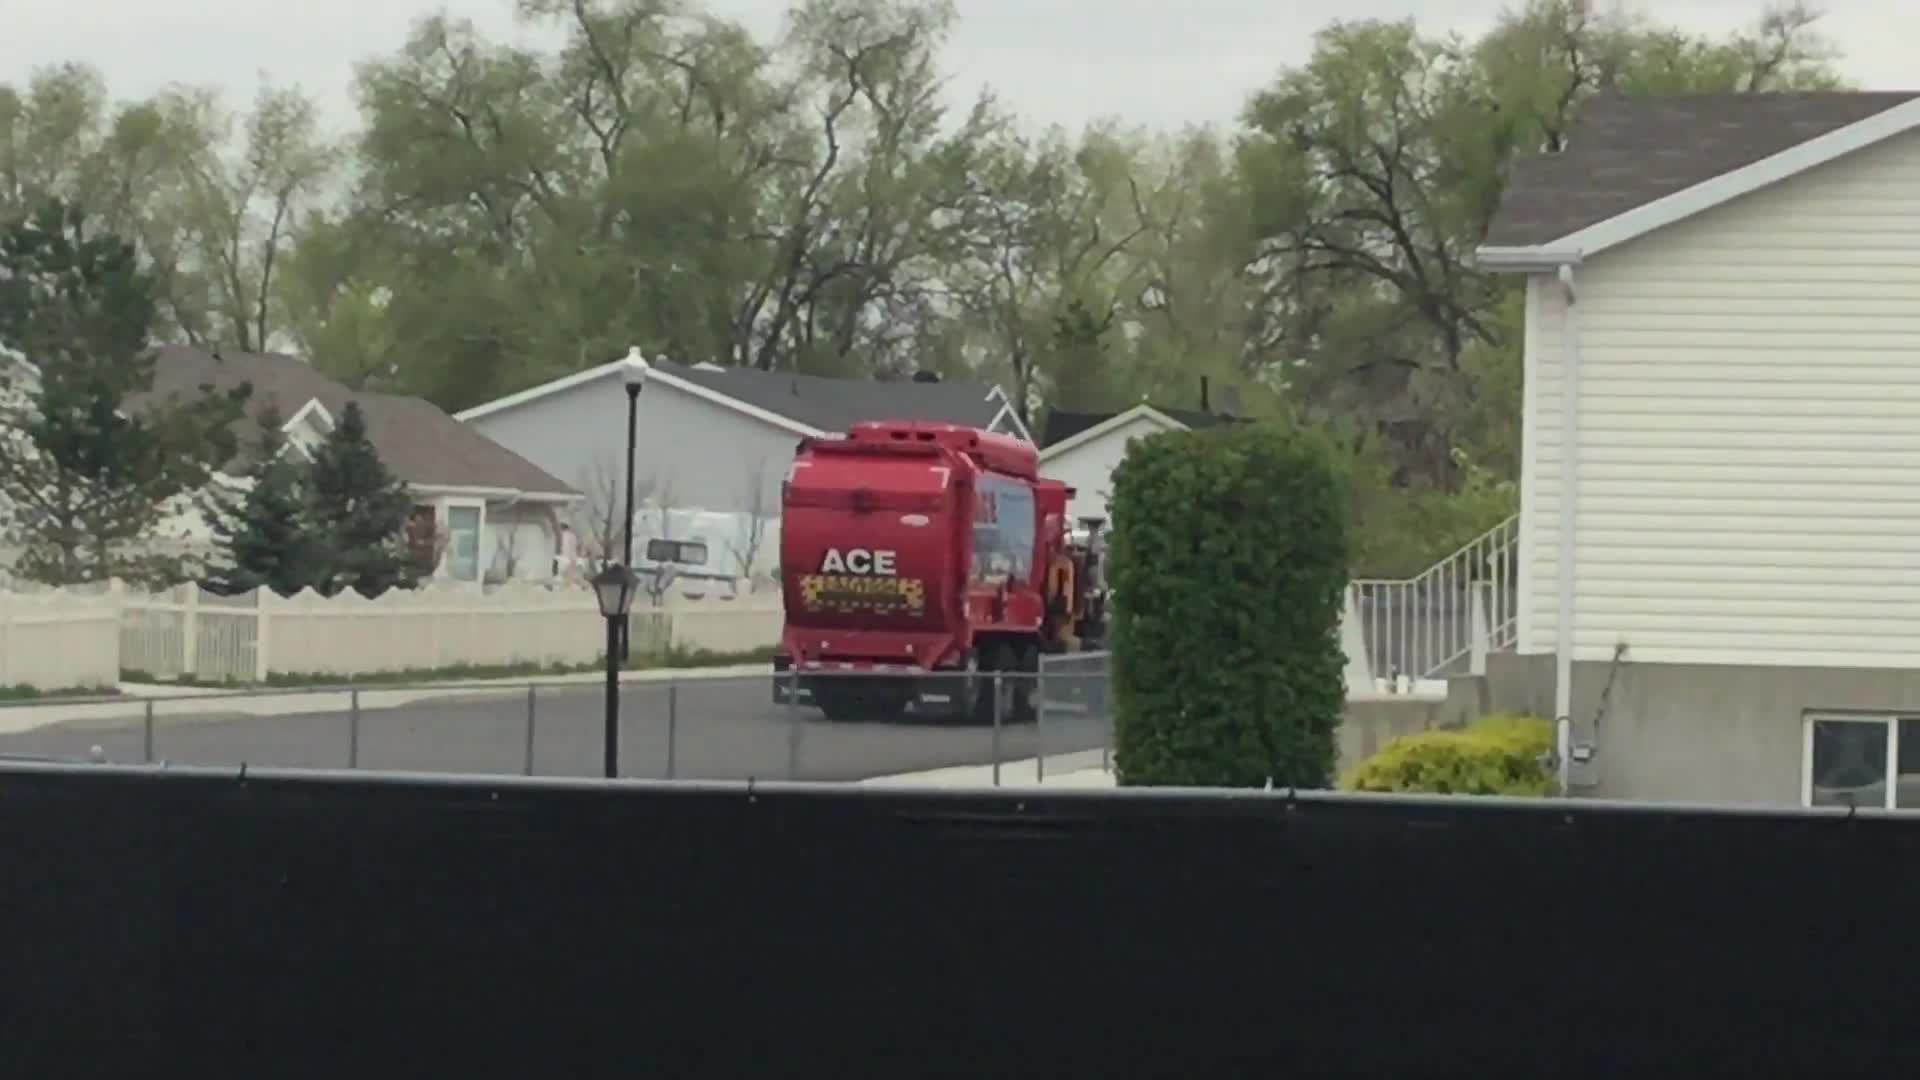 A school bus and a garbage truck - Recorded on April 26, 2022, at 4:10PM MT